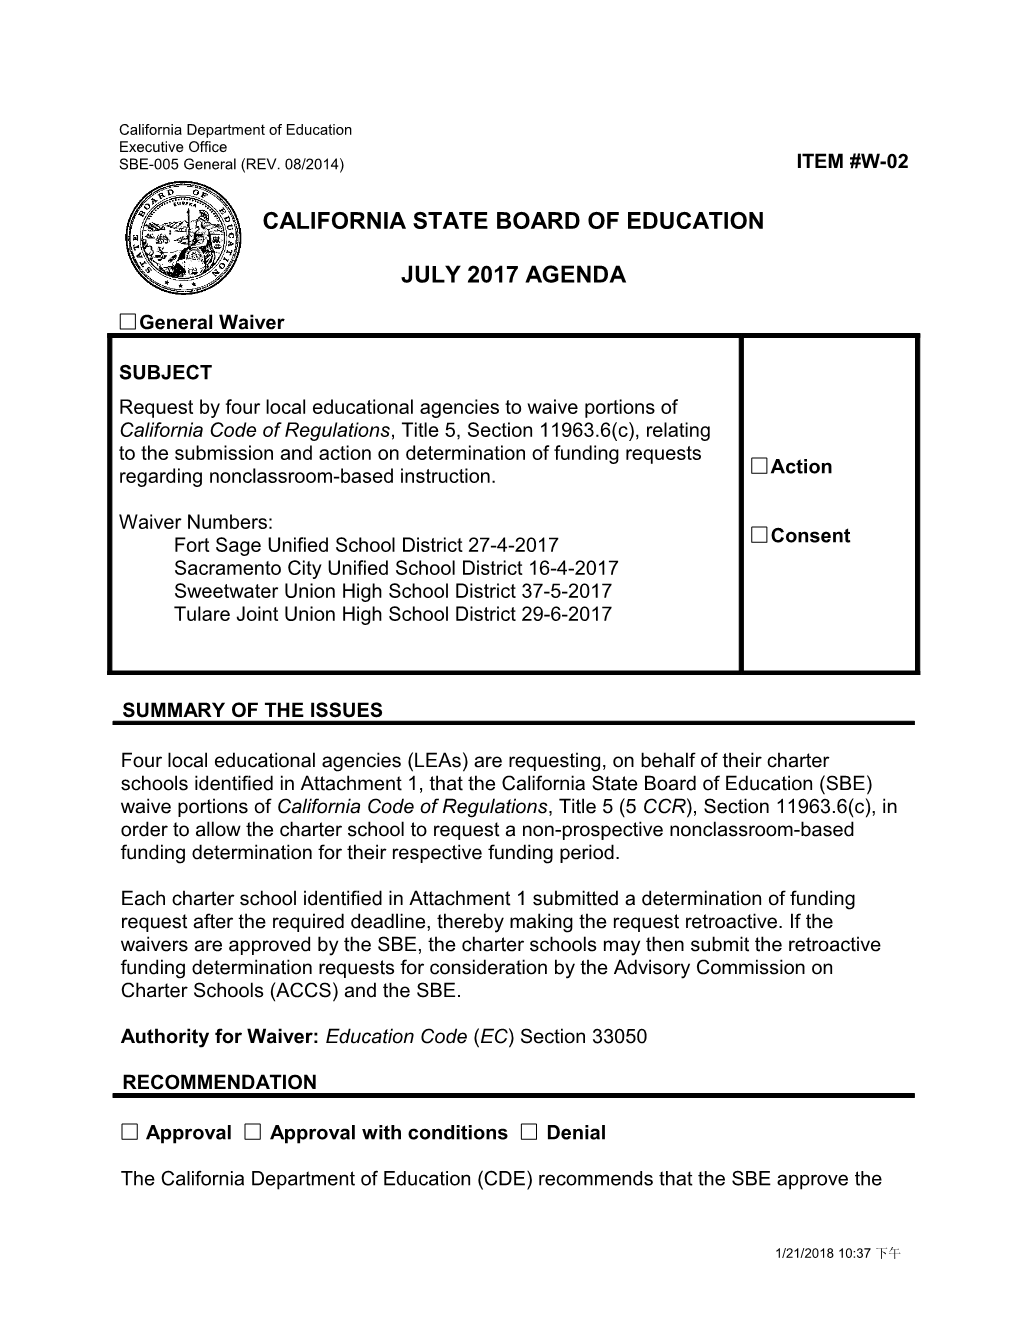 July 2017 Waiver Item W-02 - Meeting Agendas (CA State Board of Education)